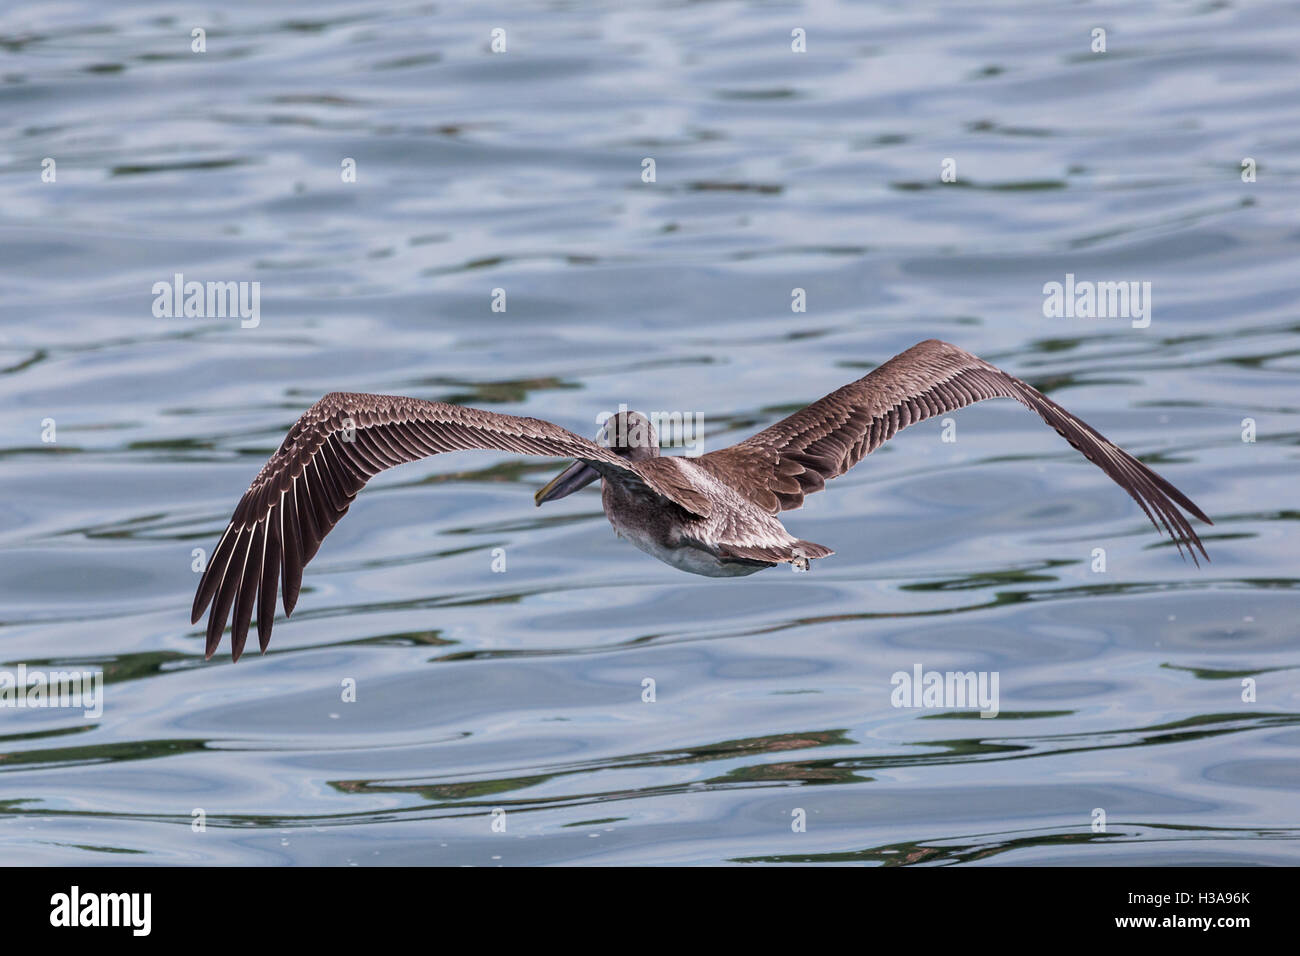 A brown pelican flies close to the ocean surface searching for fish on the coast of Costa Rica. Stock Photo